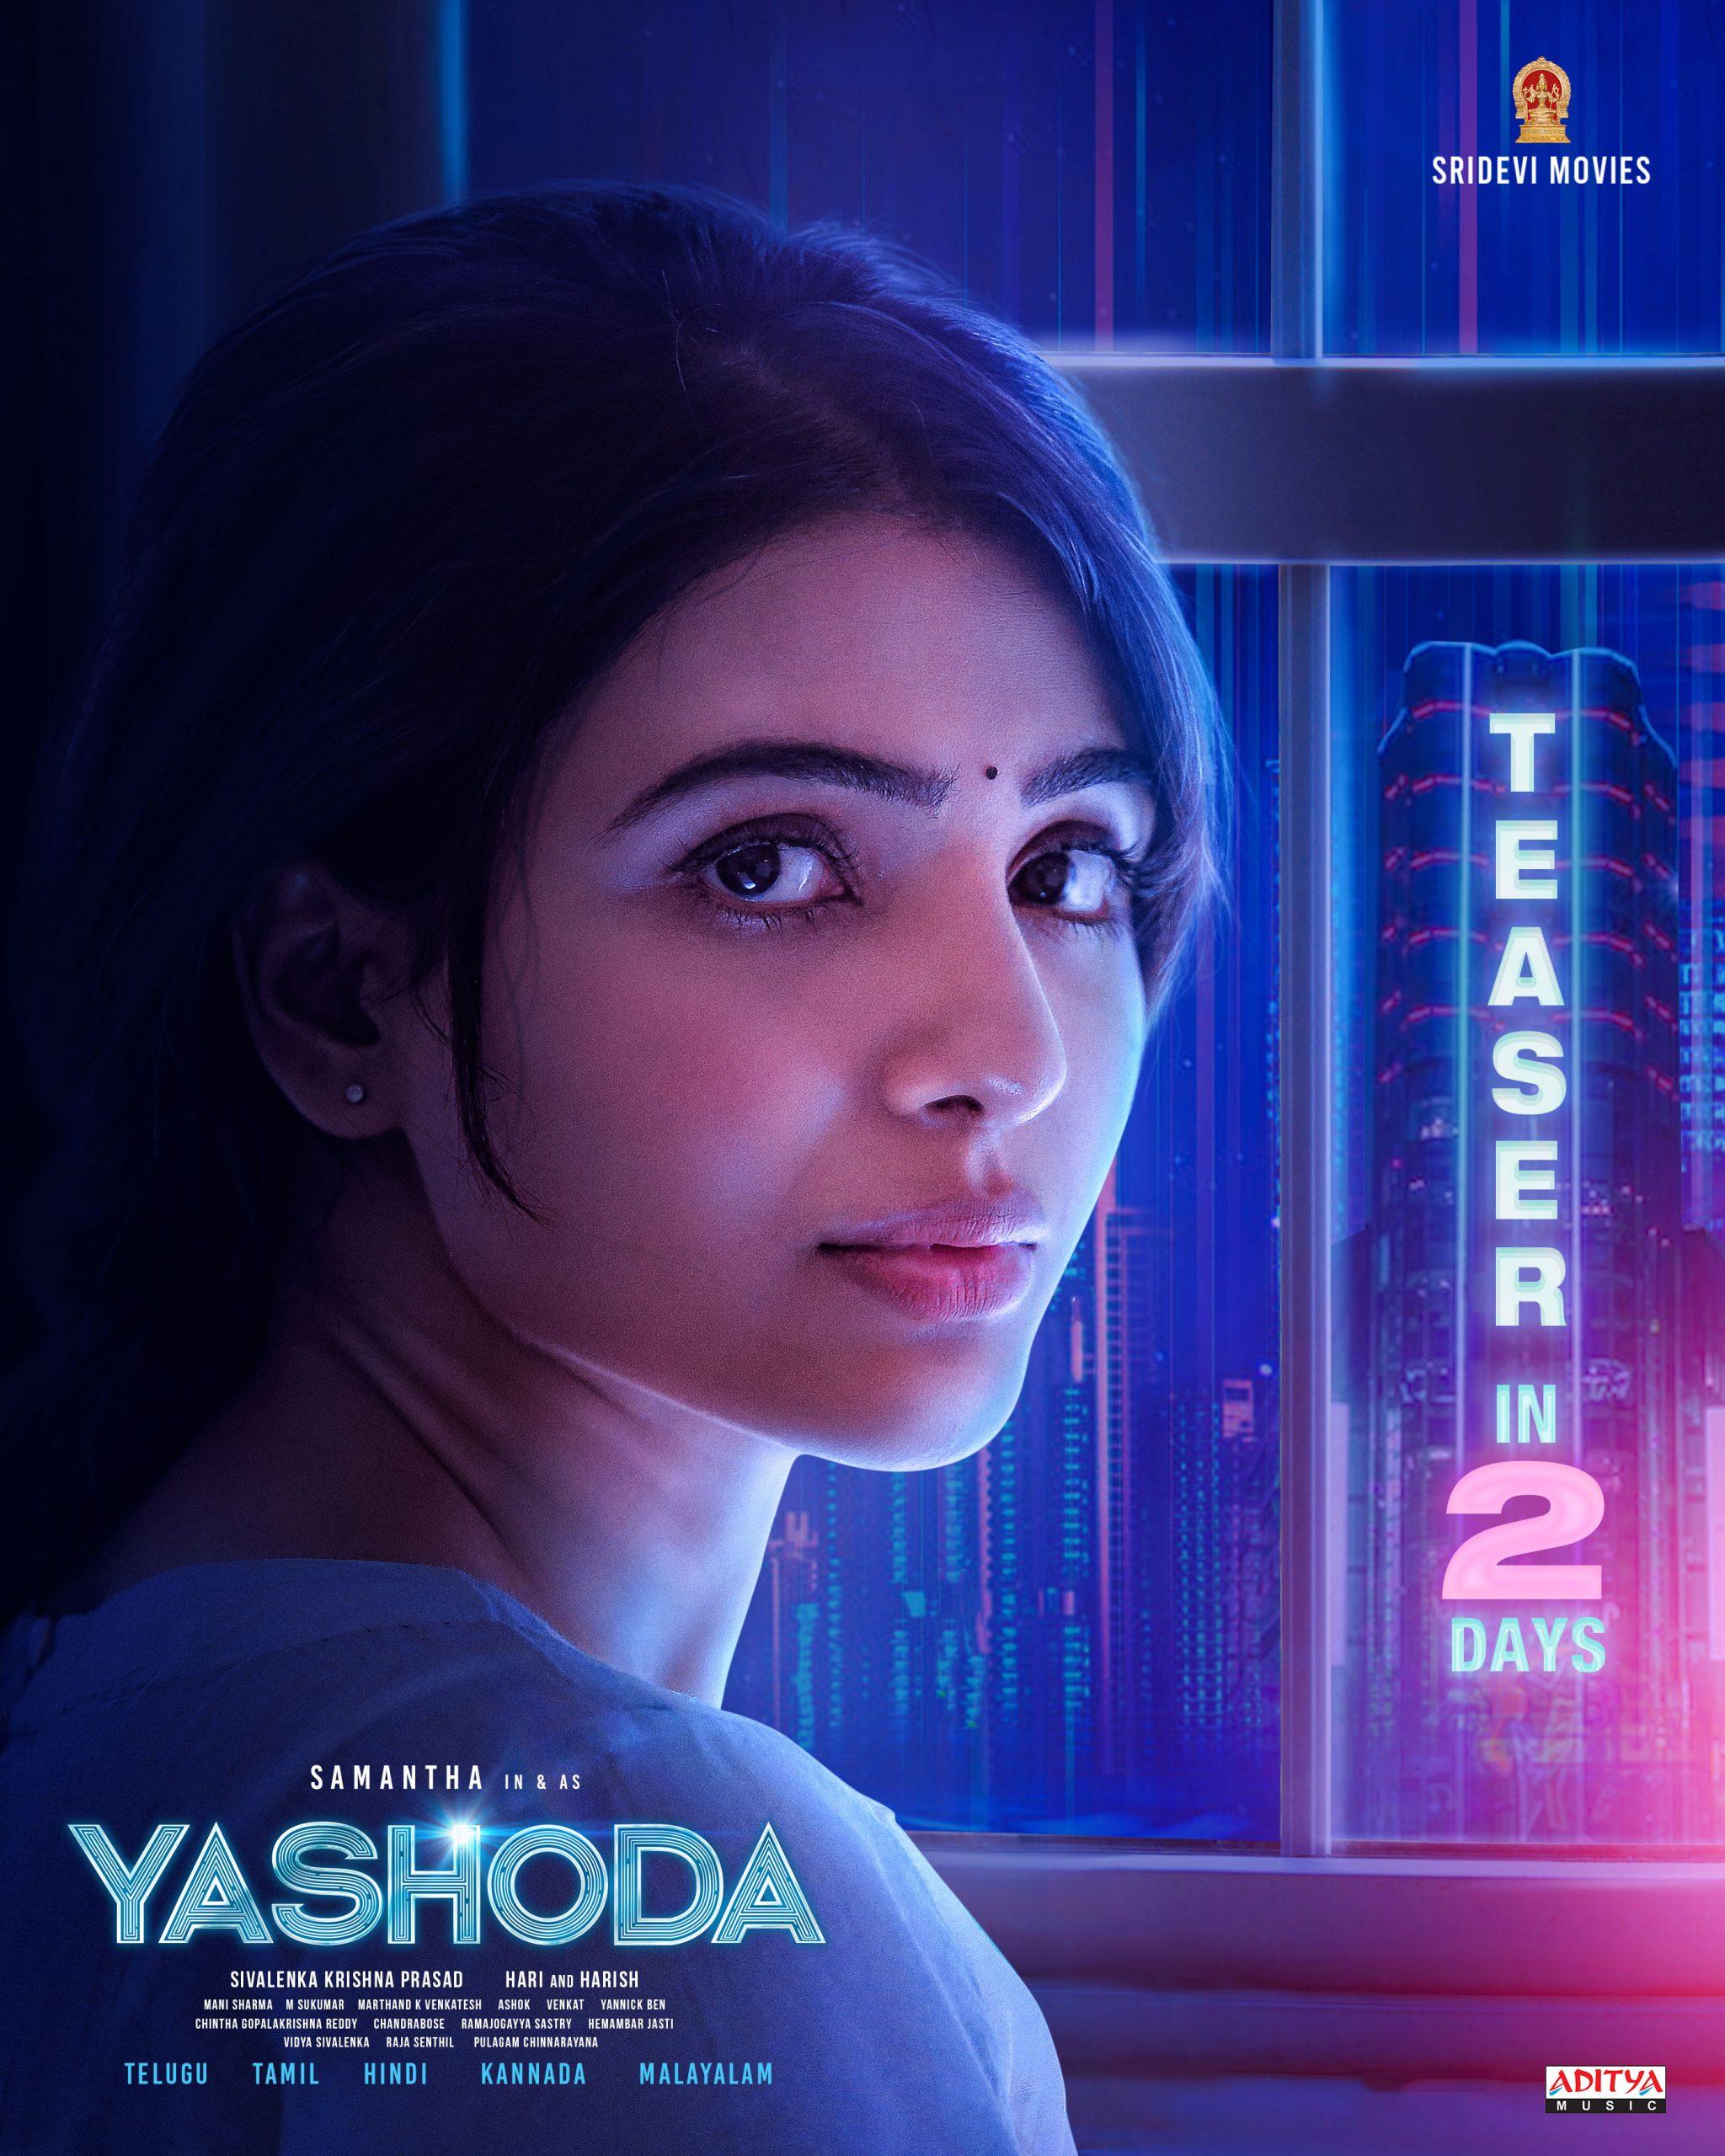 Samantha turns all gritty to ‘Do the don’ts’ in Yashoda Teaser!!